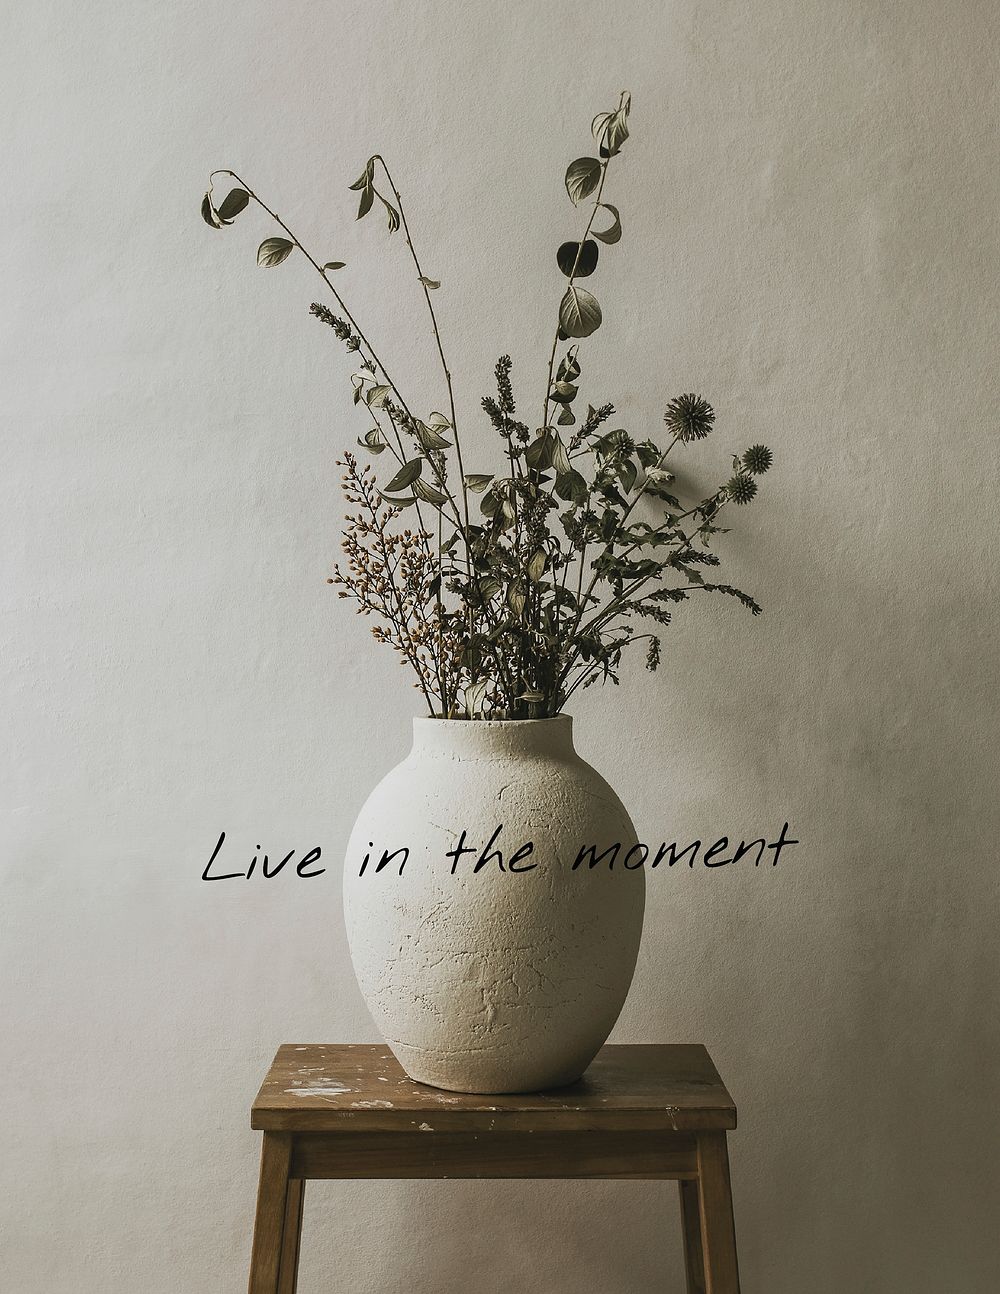 Houseplant aesthetic flyer template, live in the moment quote vector